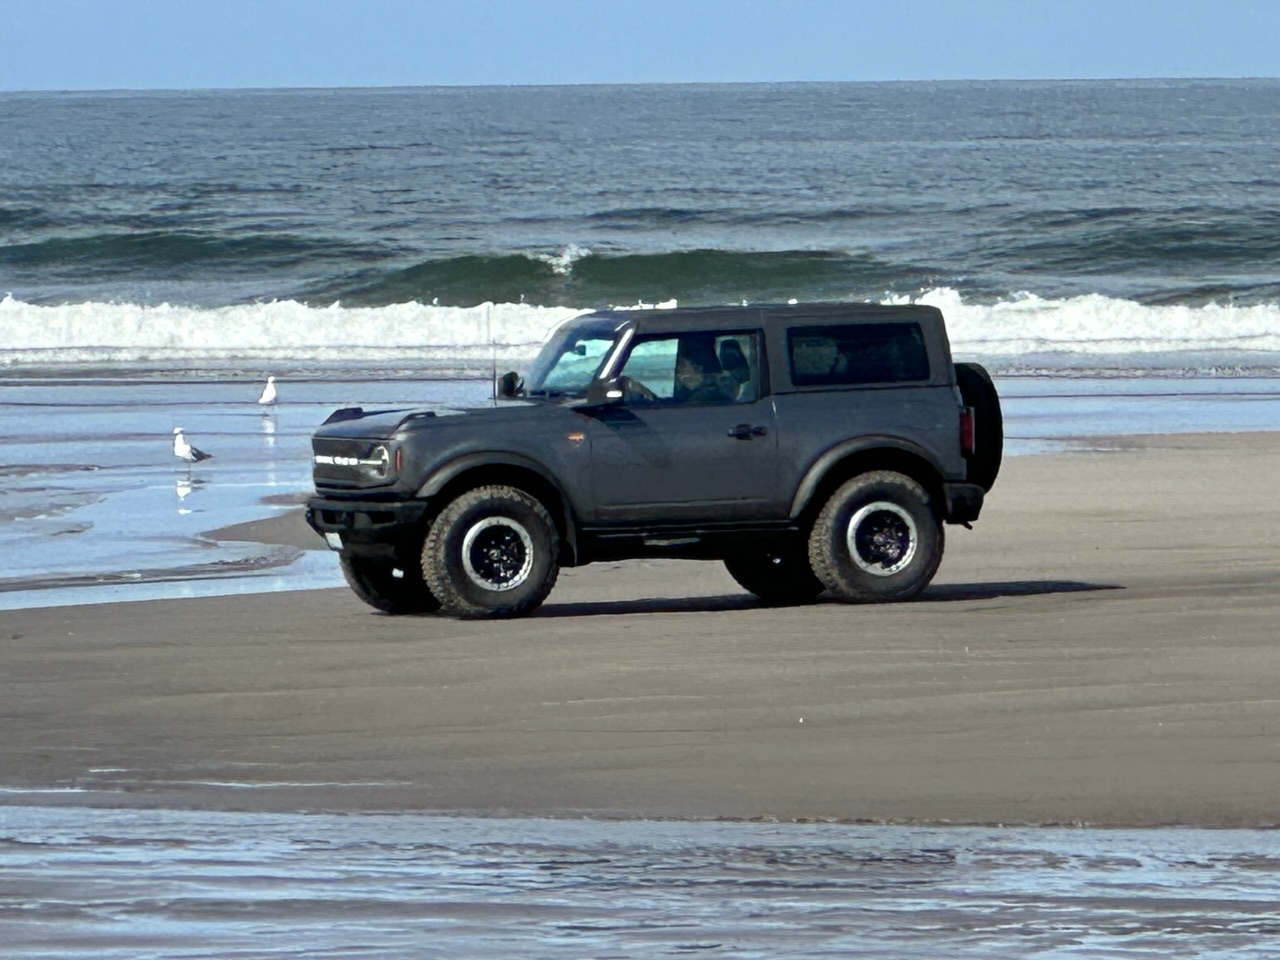 Ford Bronco Let’s see those Beach pics! IMG_5496